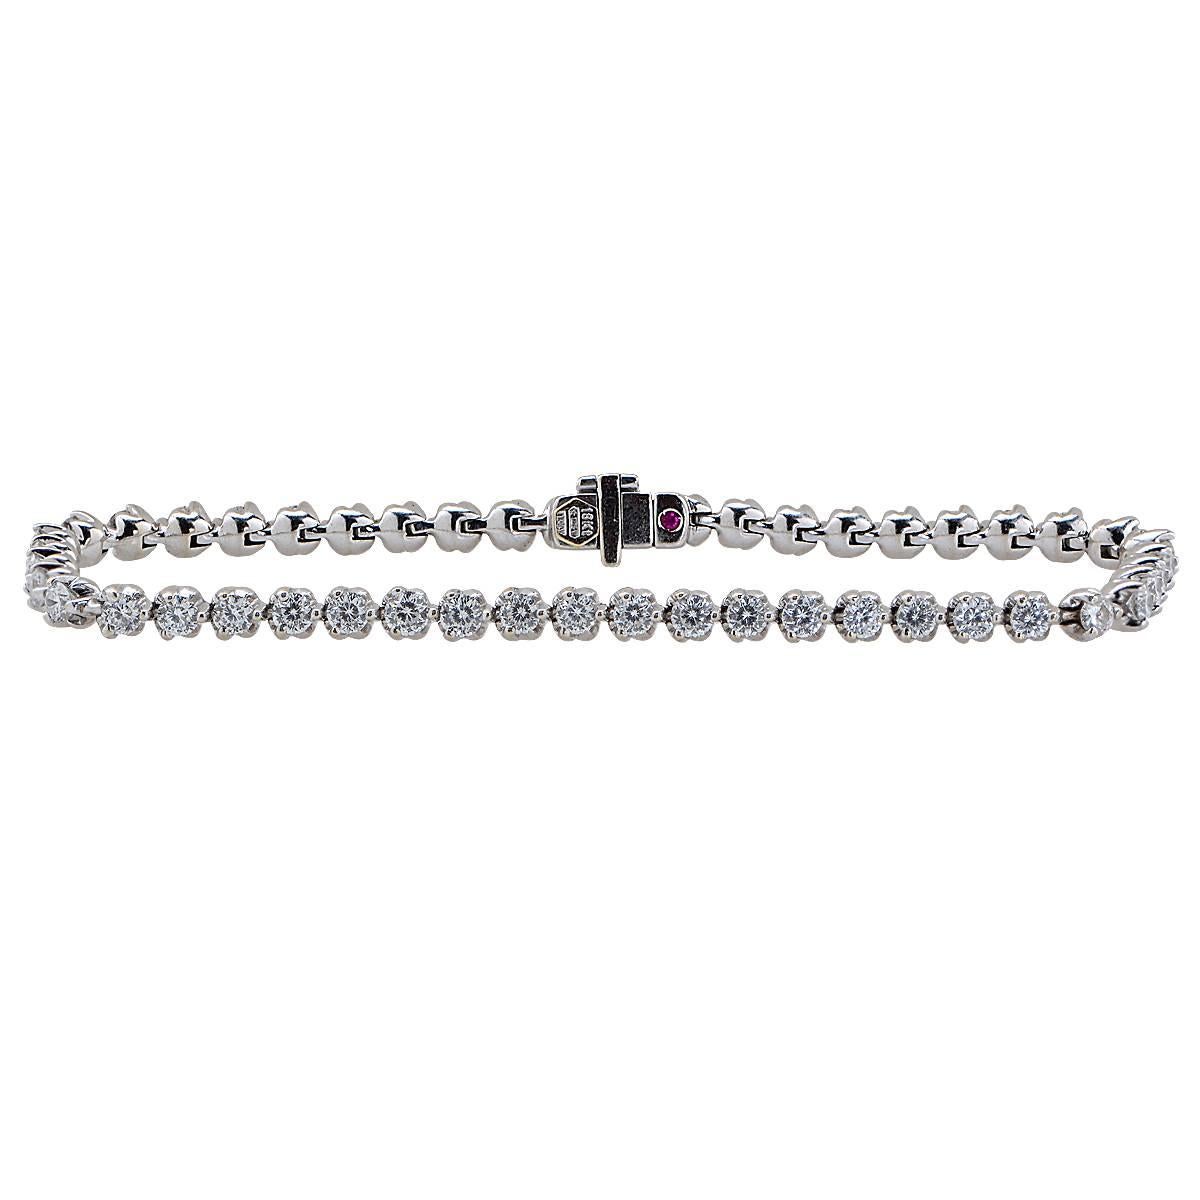 Gorgeous Diamond Bracelet from the Roberto Coin Diamond Cento Collection. The Bracelet Features 48 Custom Cut Diamonds with a Total Weight of 3.43 Carats, F-G Color, VS Clarity, Set in Roberto Coin's 18 Karat White Gold Tulip Setting.